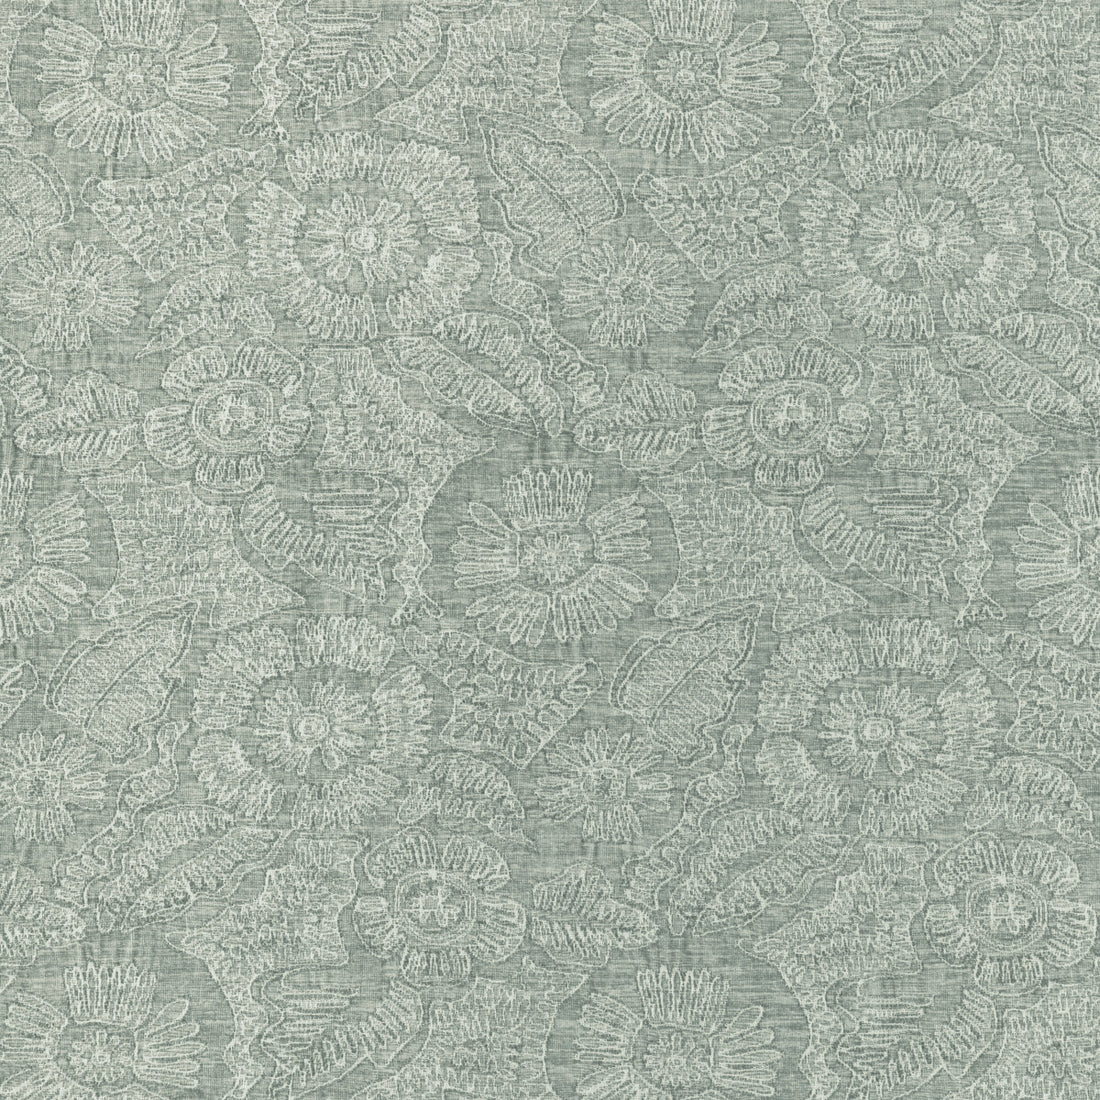 Chenille Bloom fabric in seaglass color - pattern 36889.135.0 - by Kravet Couture in the Atelier Weaves collection